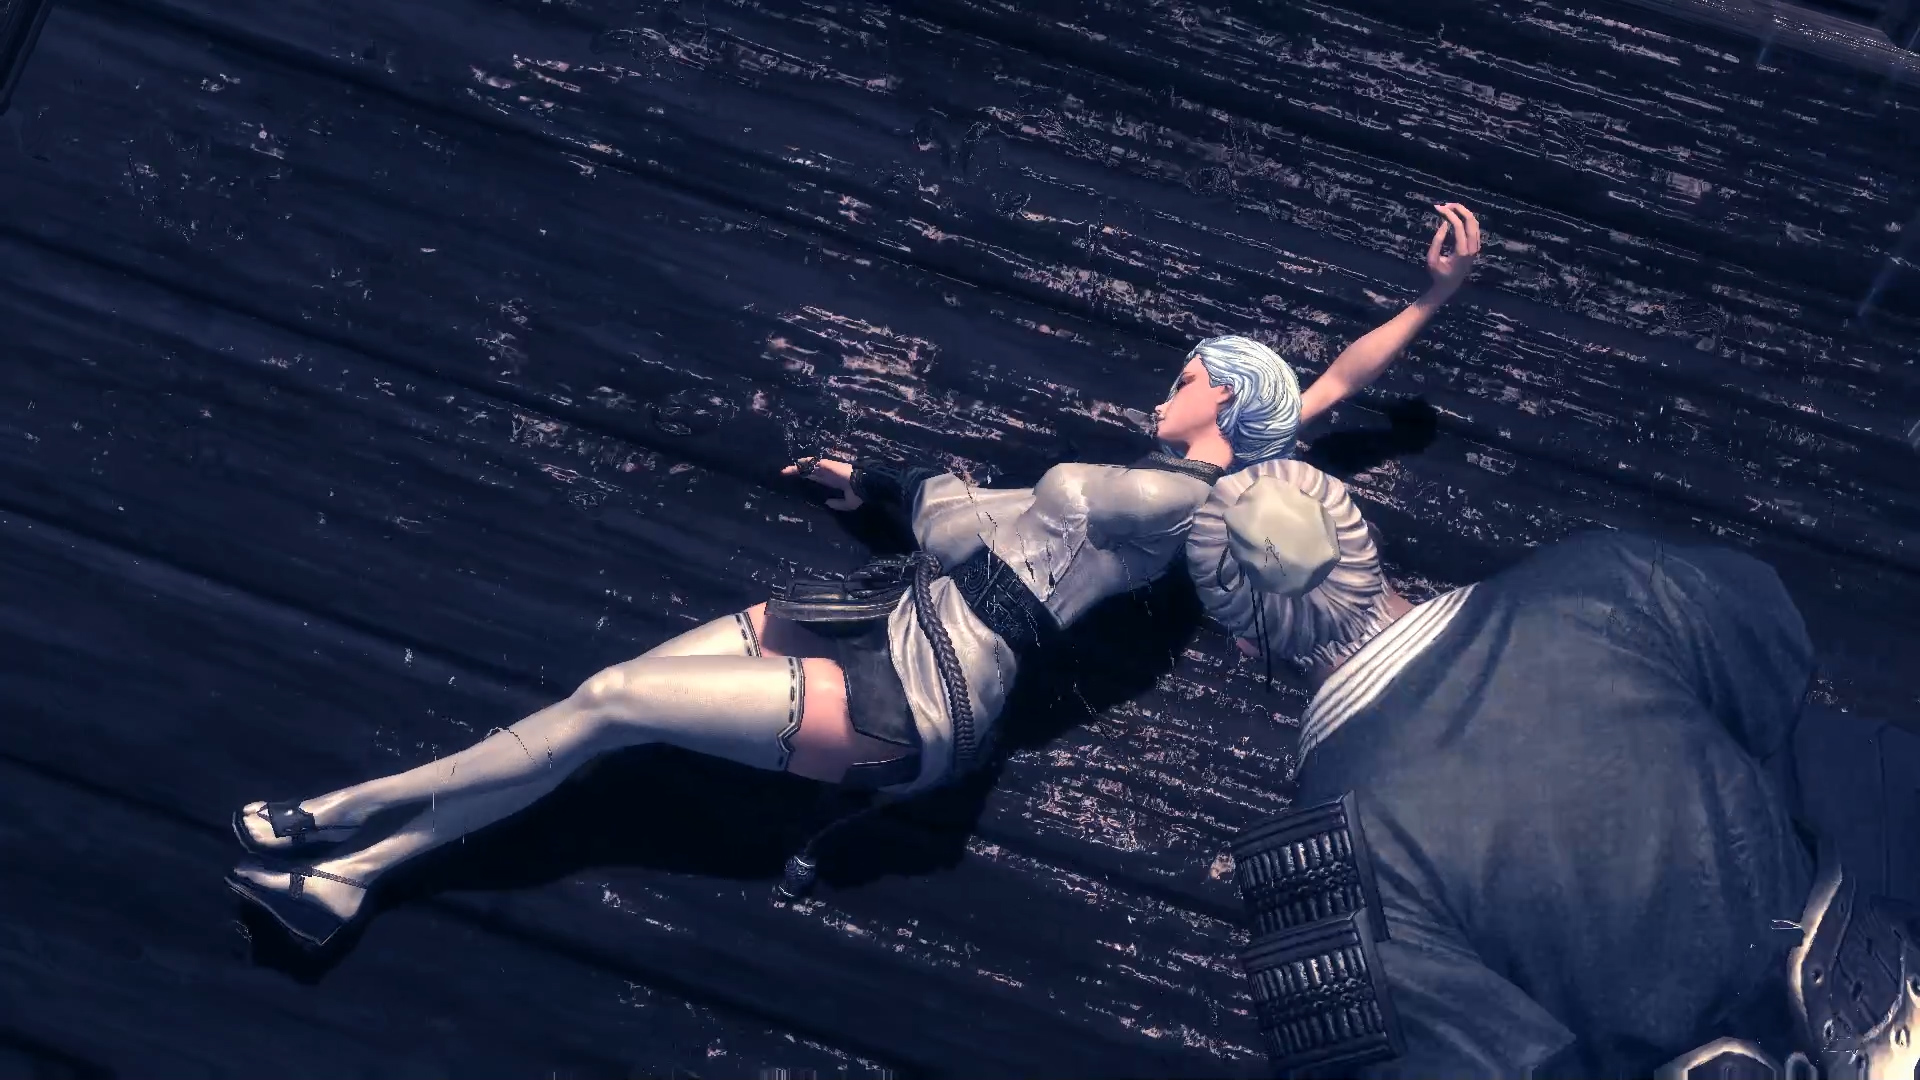 The Dramatic Opening Moments Of Blade & Soul